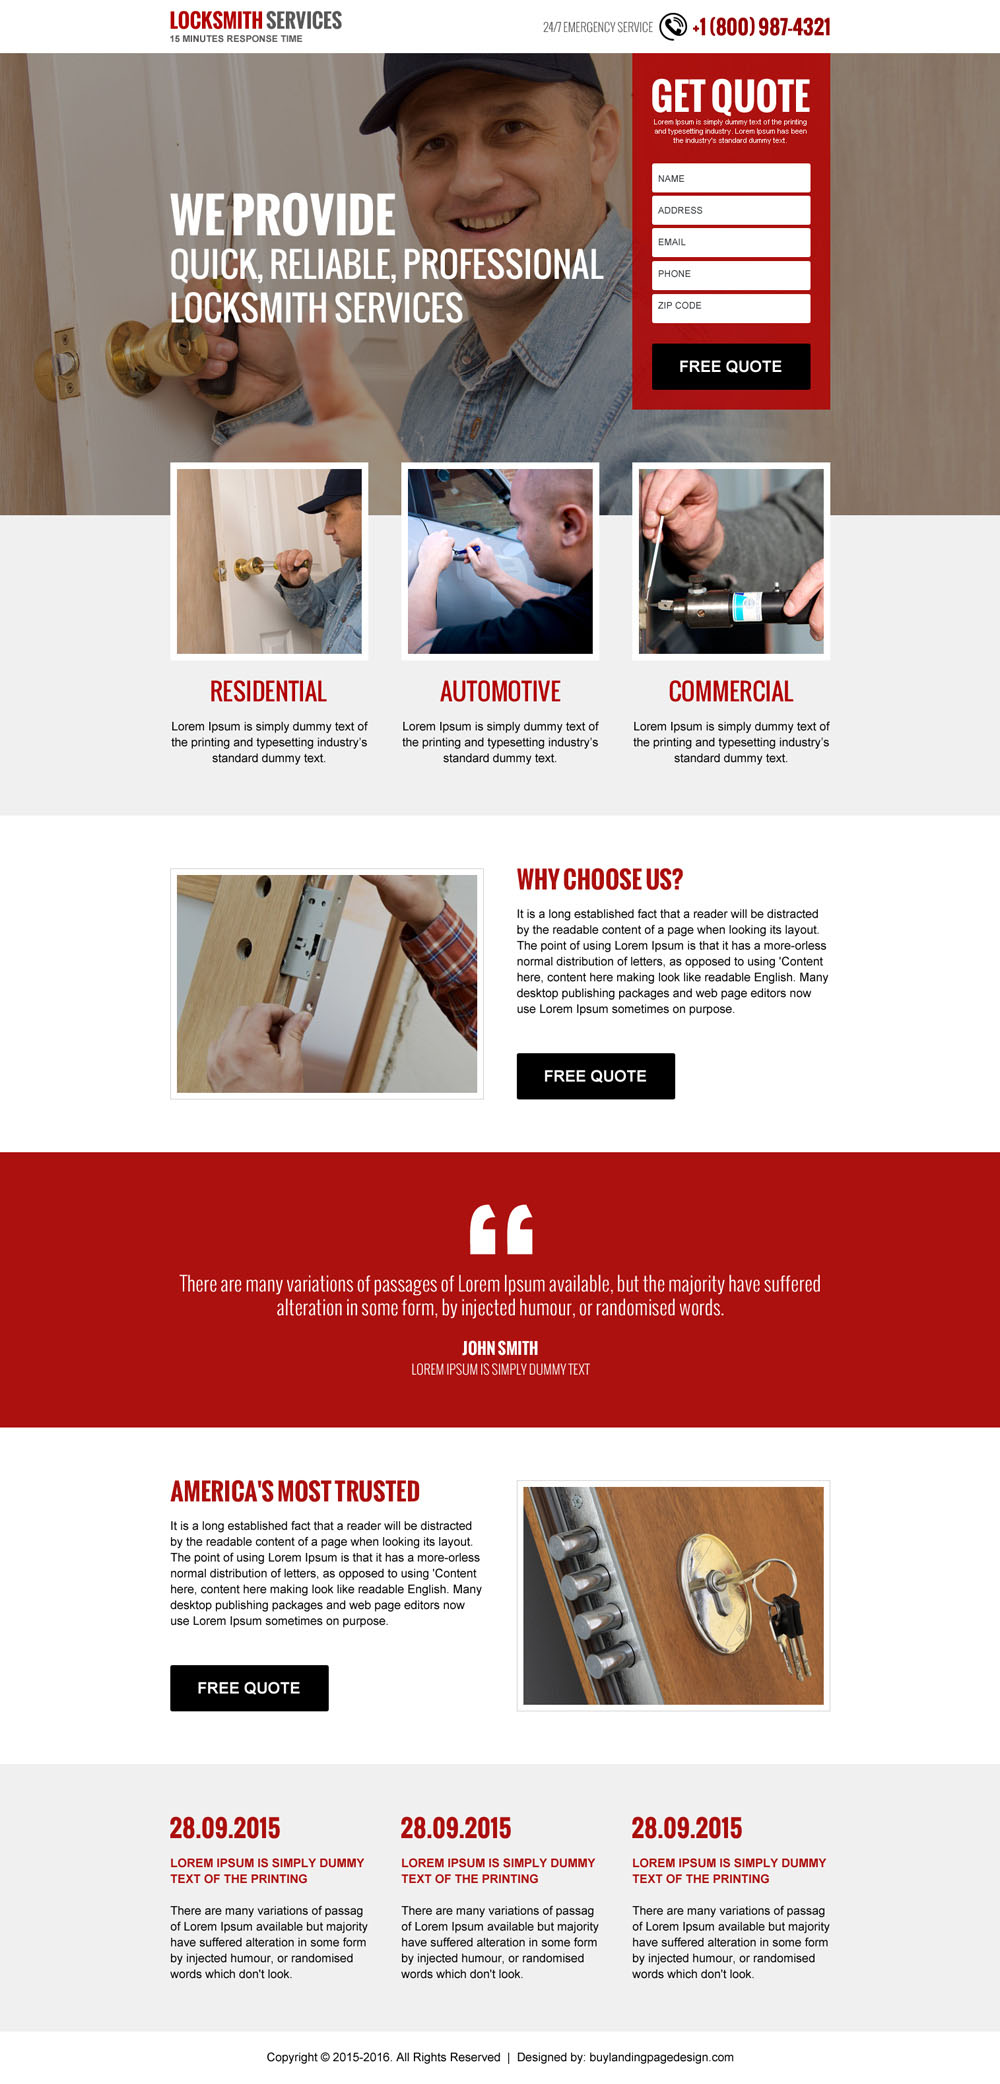 locksmith-services-free-quote-lead-generation-best-converting-landing-page-design-001